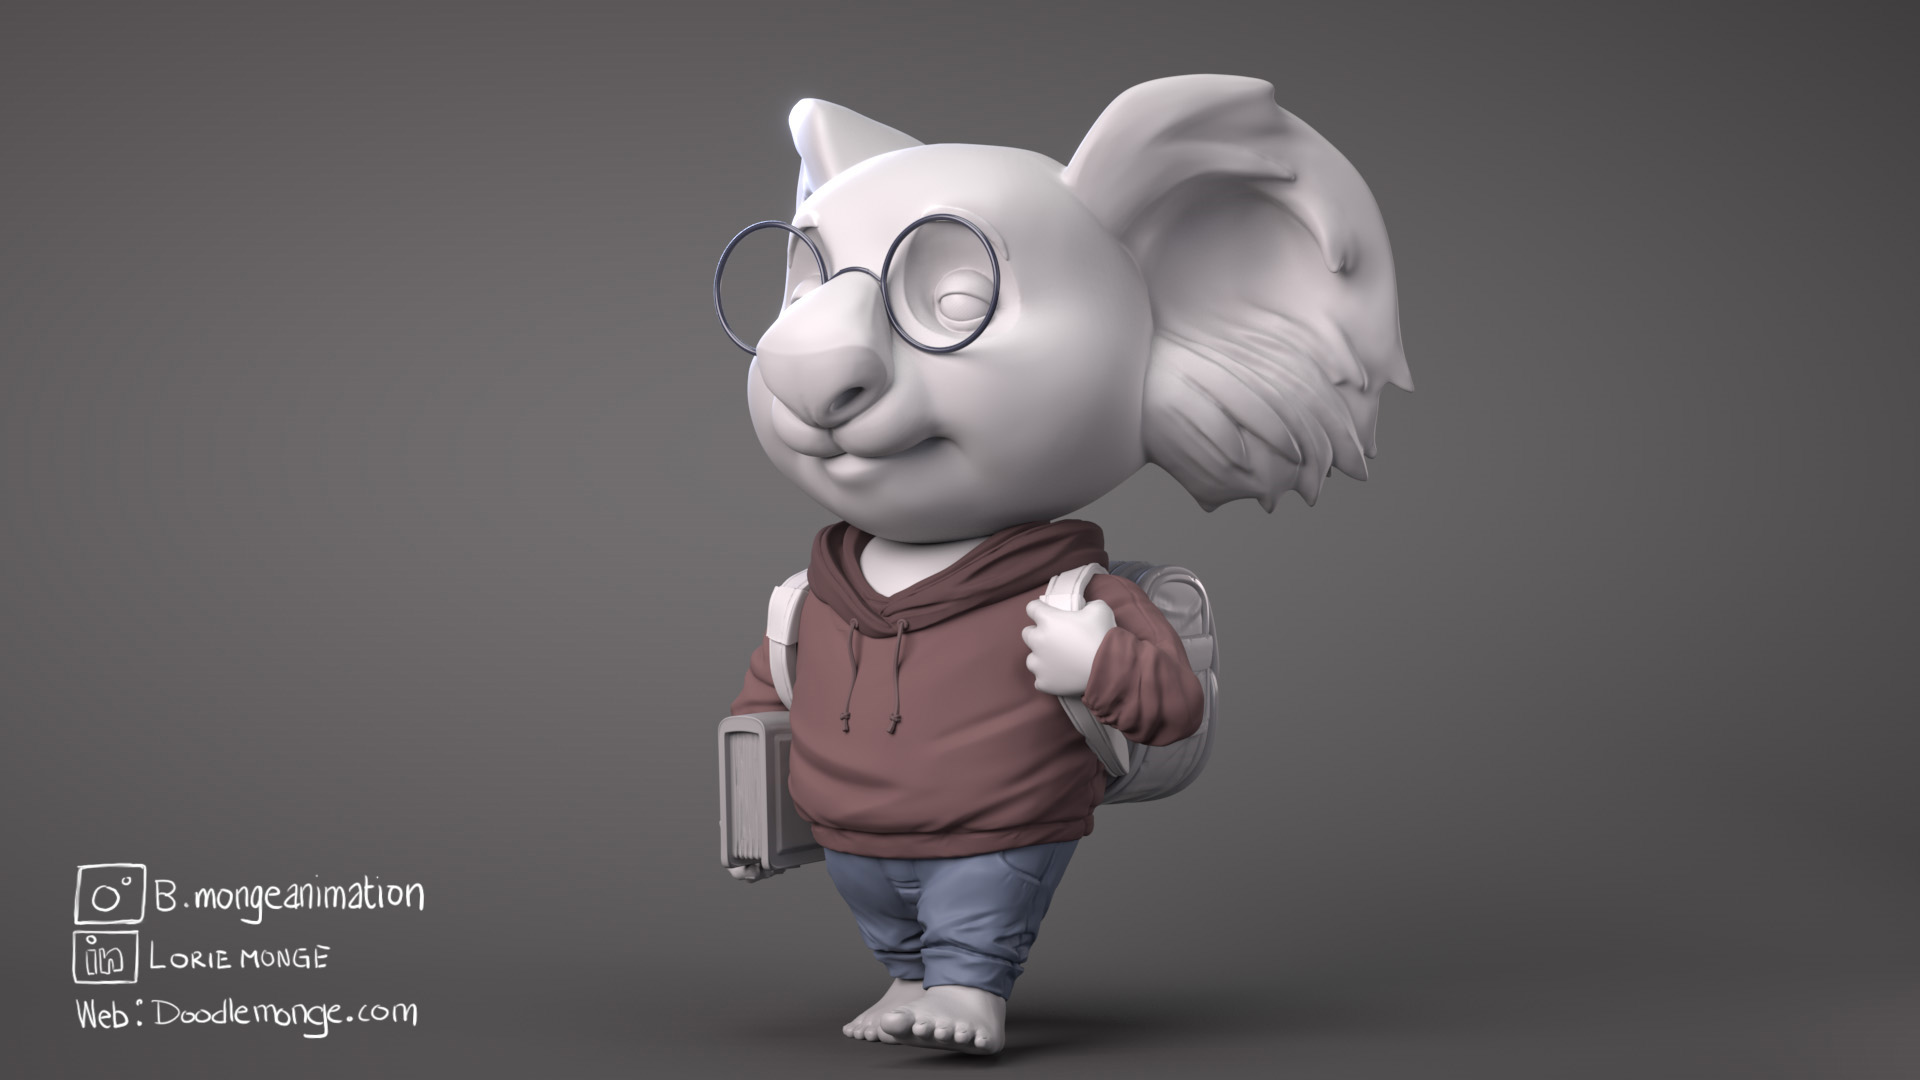 A stylised Koala character render. Wearing round glasses, a red hoodie and blue jeans. Holding a book and a backpack.